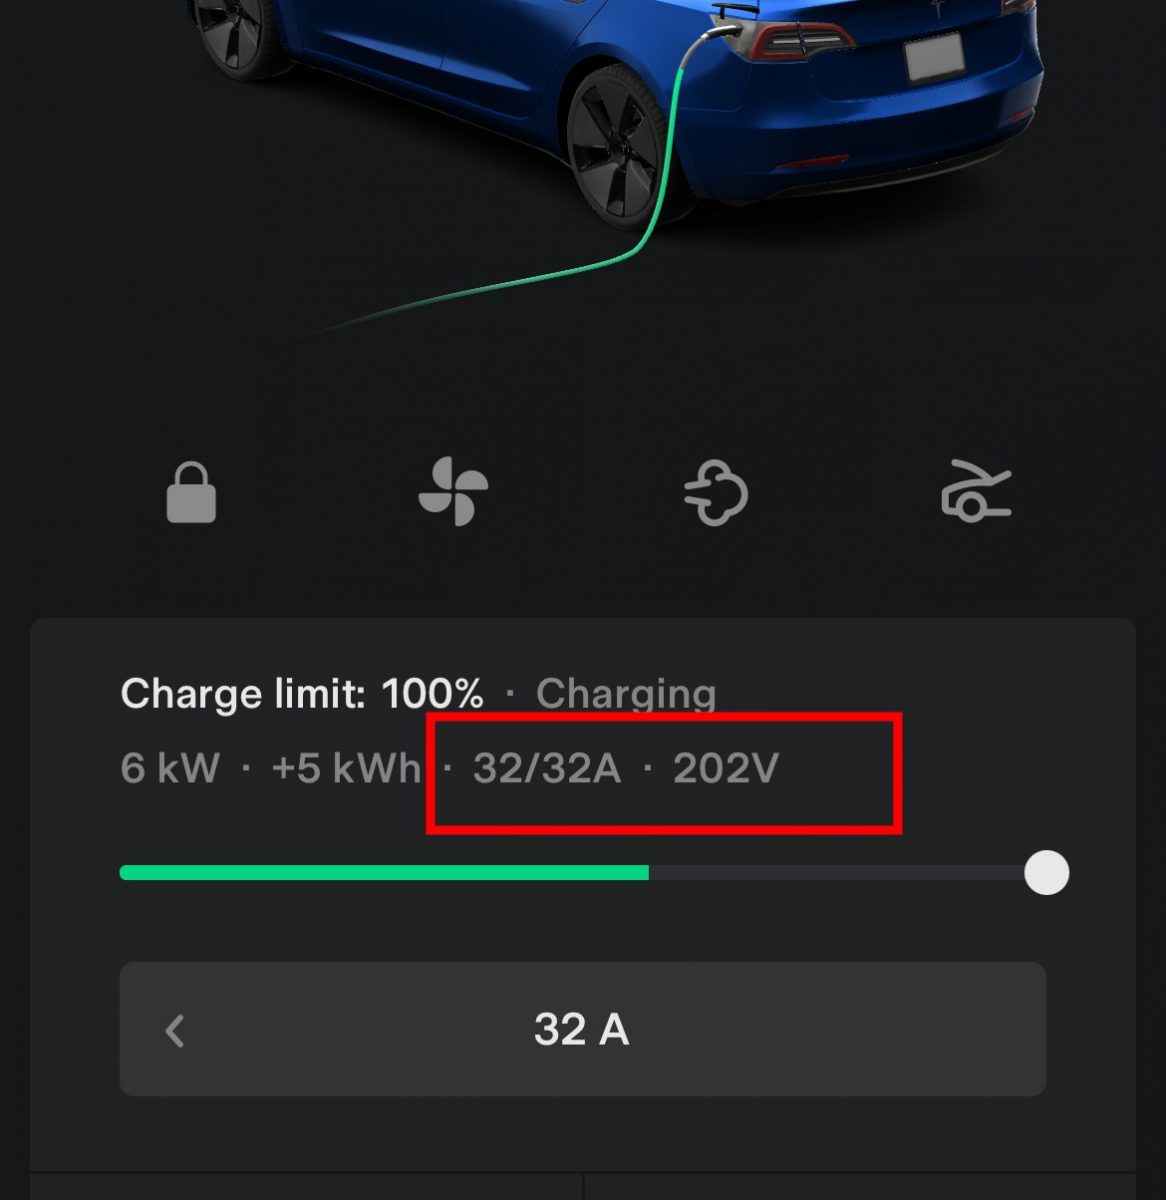 Tesla charging on Blink charger at 6 kW